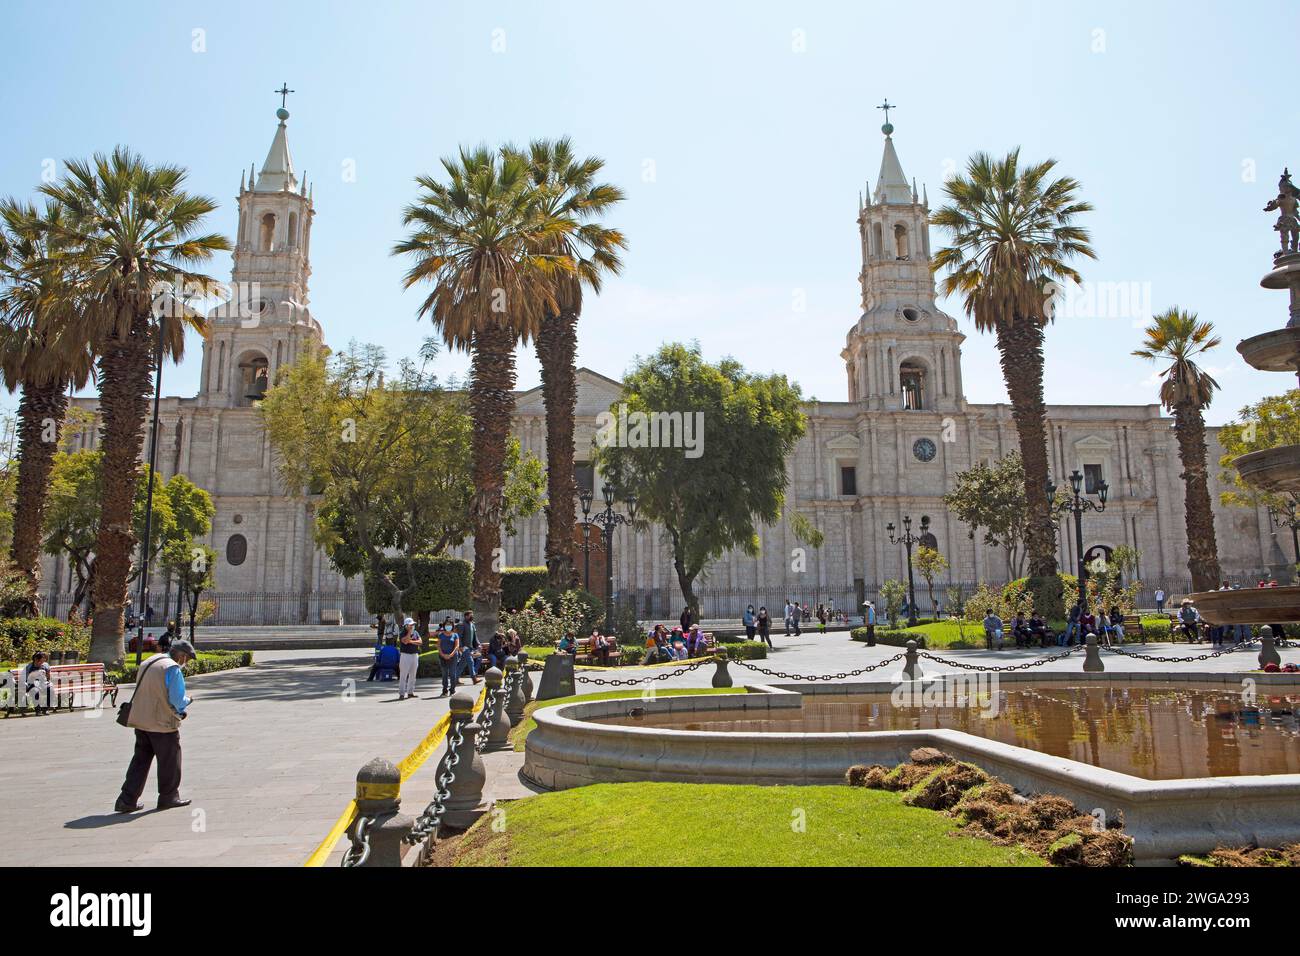 Cathedral of Arequipa or Cathedral Basilica of Santa Maria, Arequipa, Province of Arequipa, Peru Stock Photo